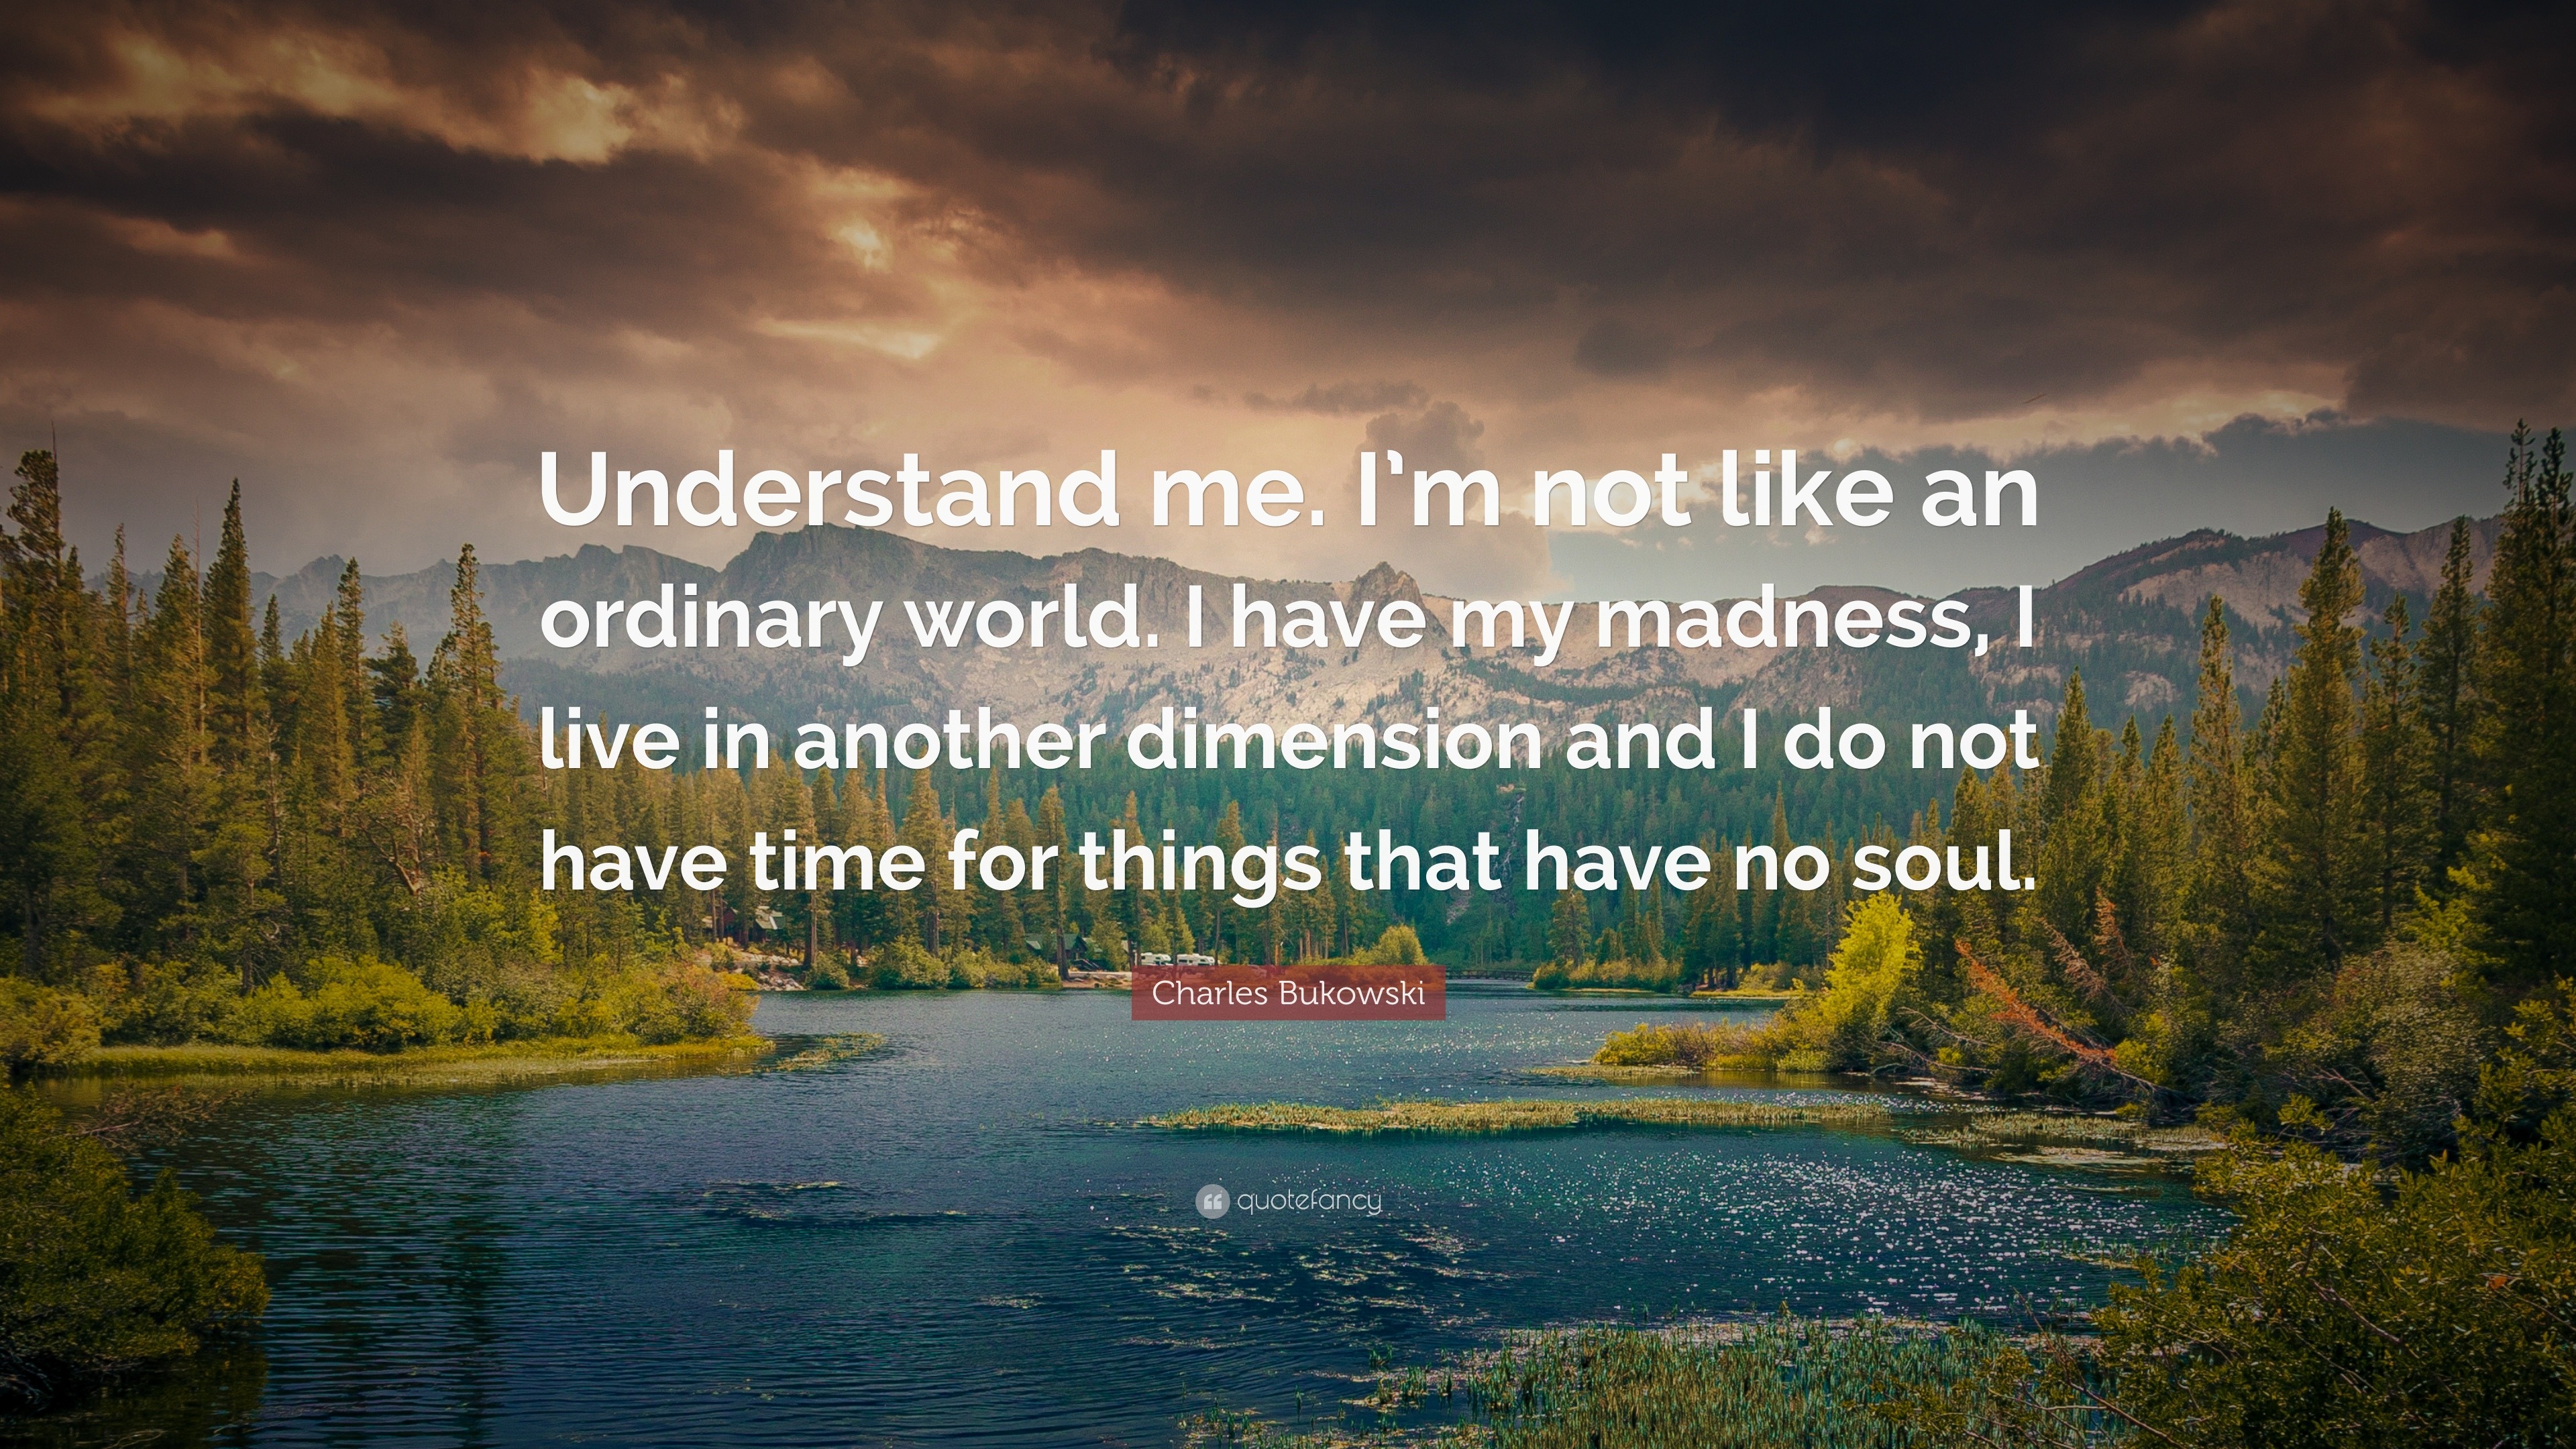 Charles Bukowski Quote: “Understand me. I’m not like an ordinary world